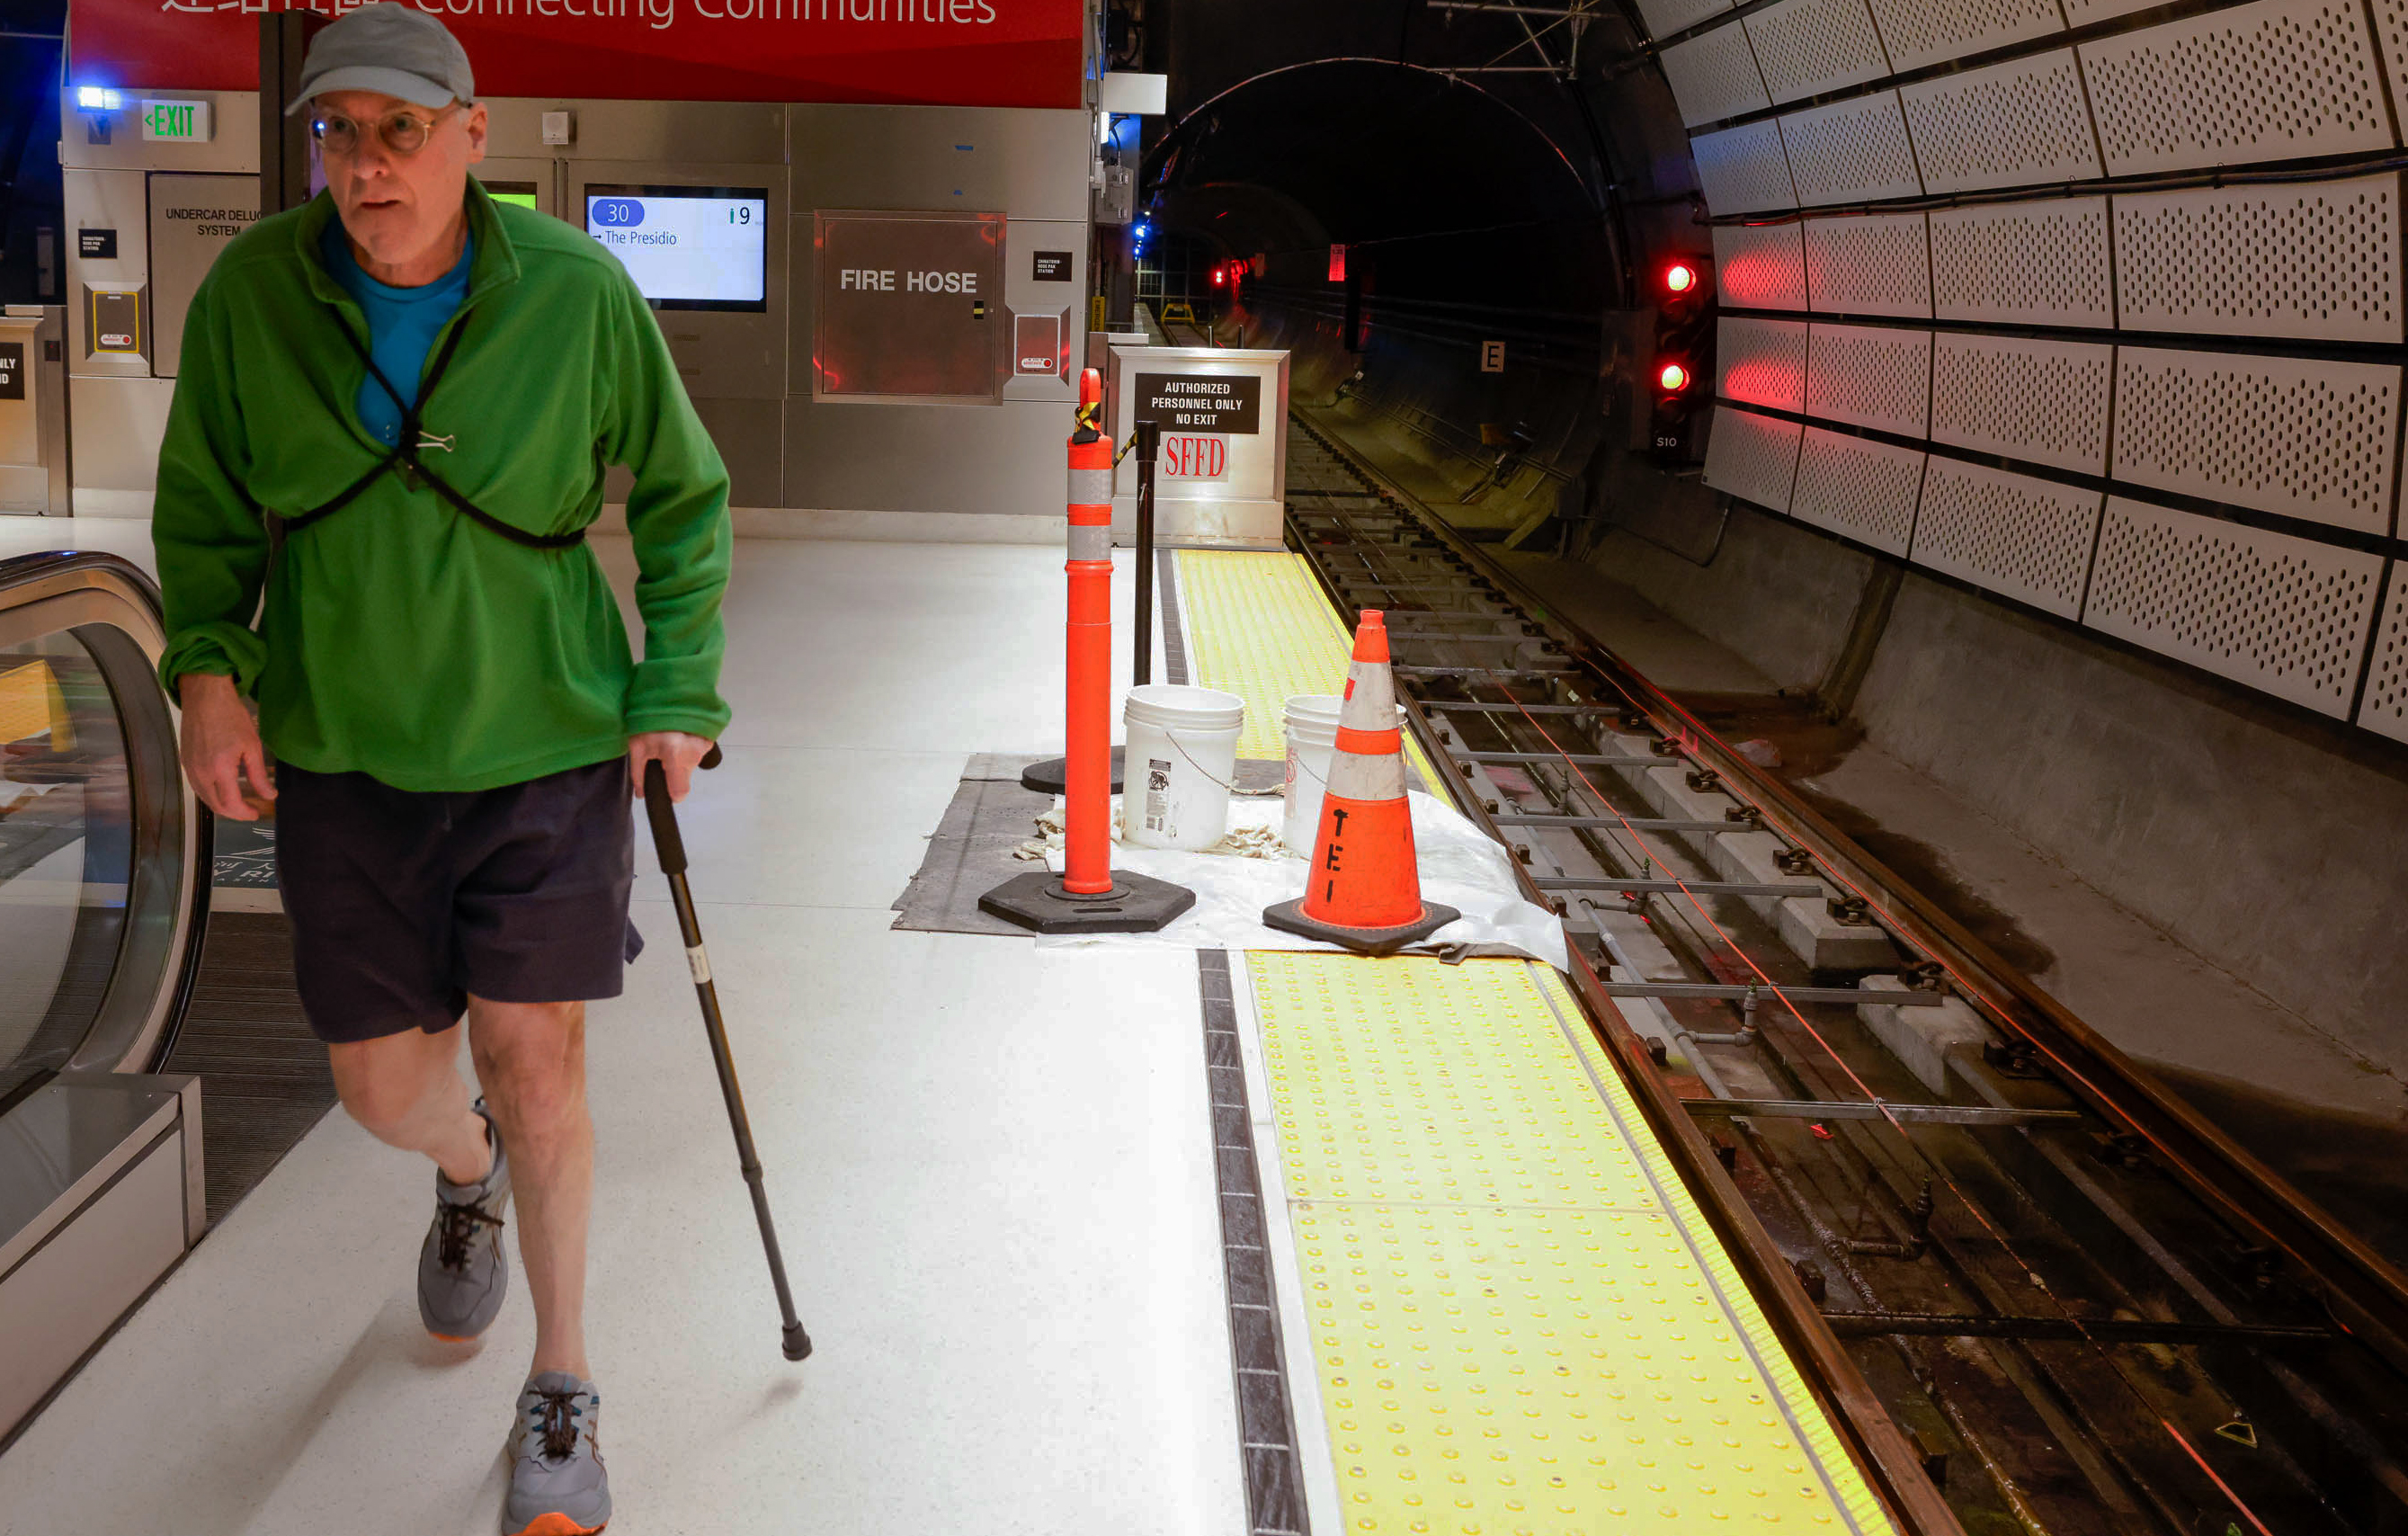 A man with a cane walks by subway tracks with traffic cones and construction signs.